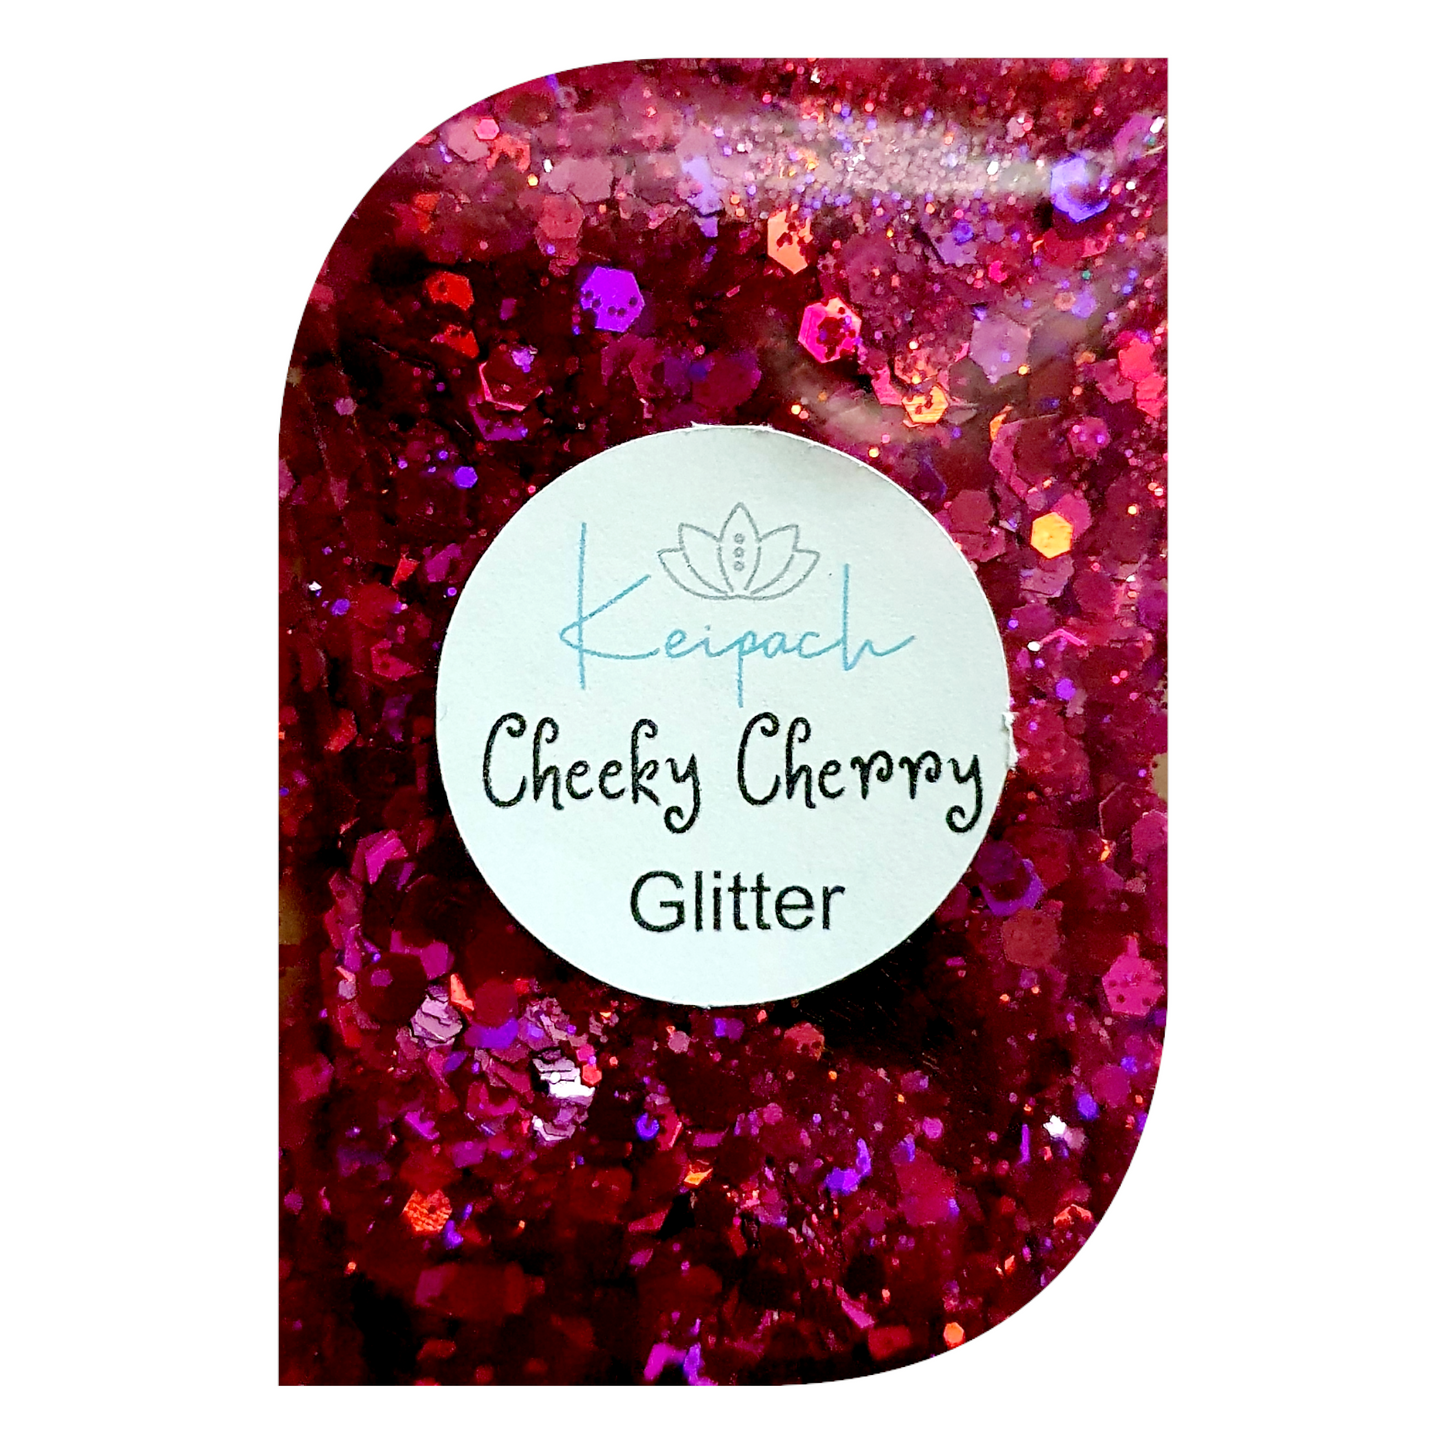 Chunky Holographic Glitter - Cheeky Cherry - Keipach